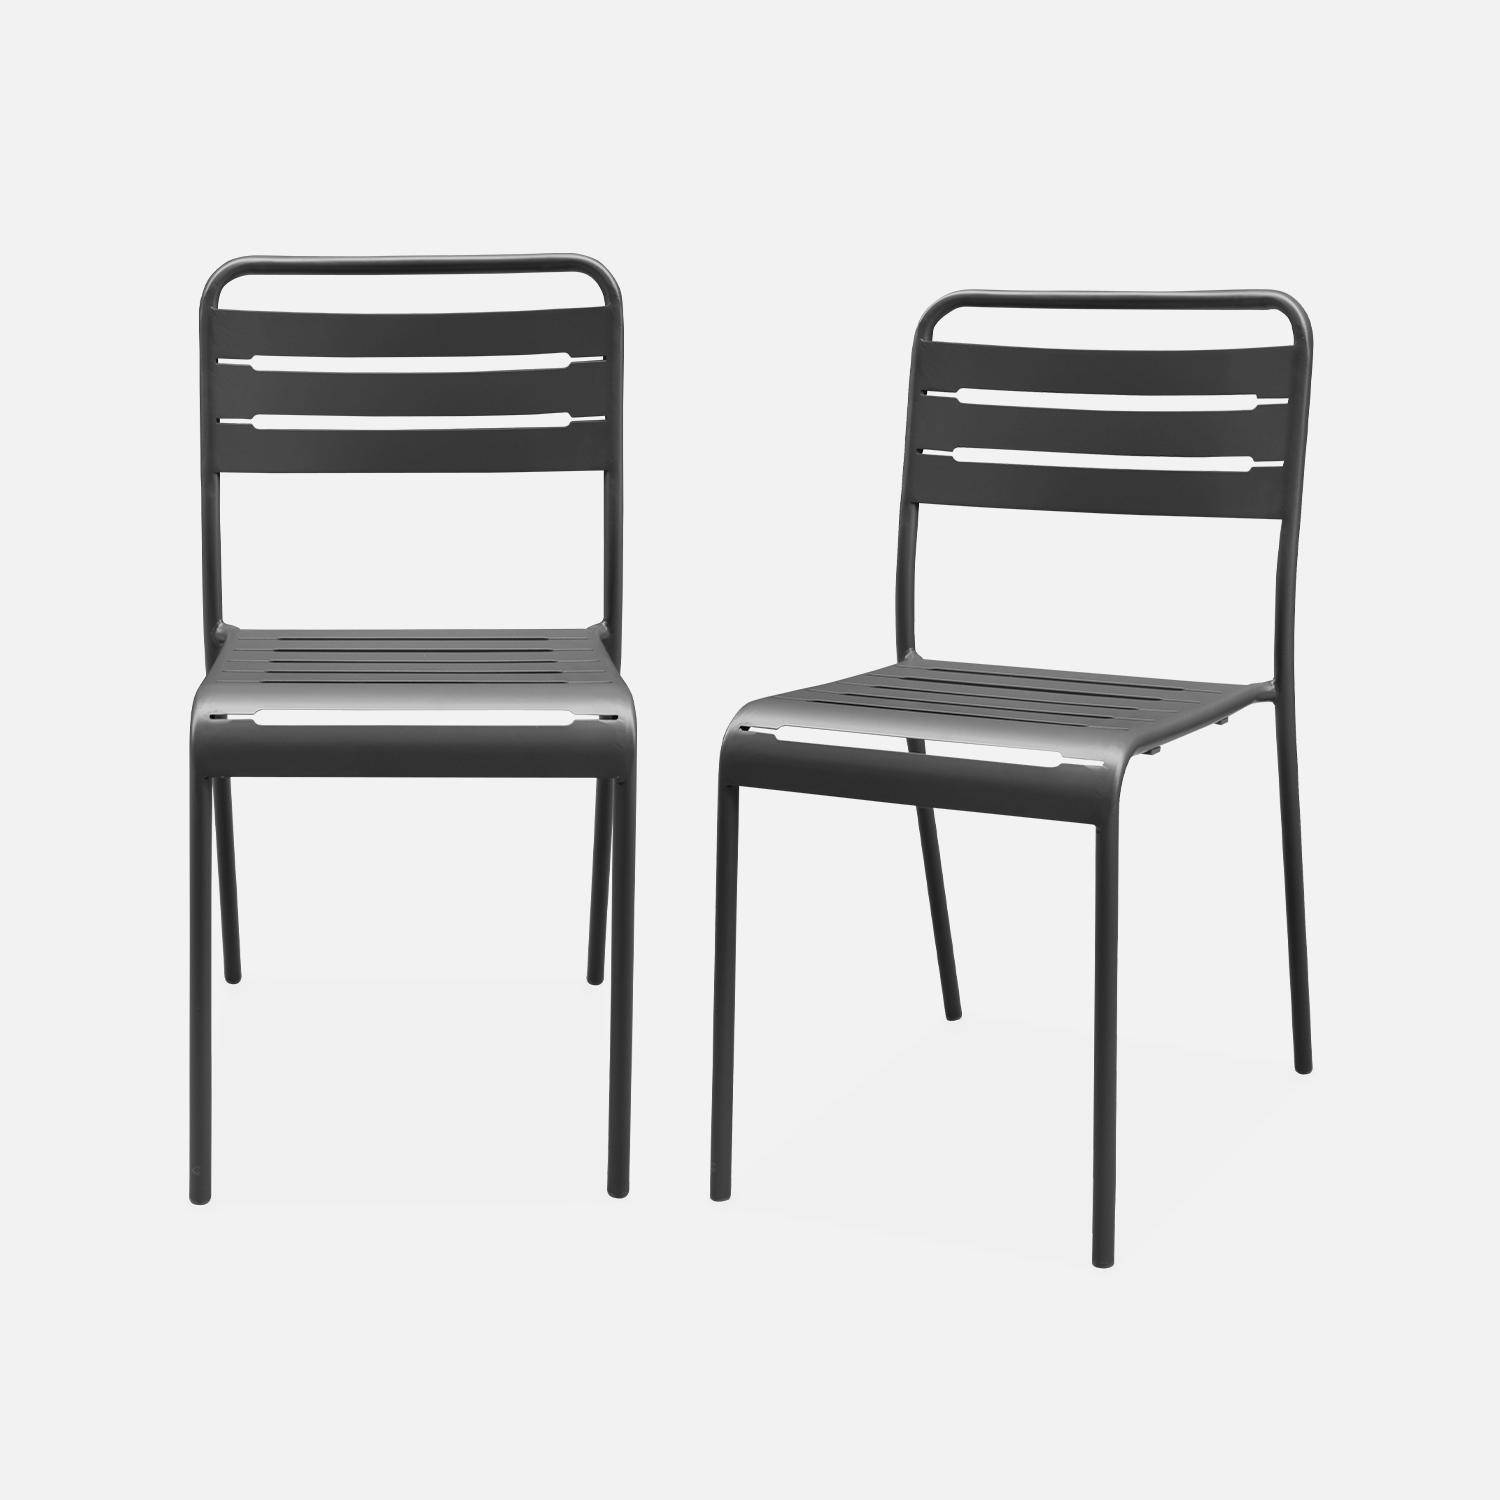 Pair of bistro steel garden chairs, stackable, W44xD52xH79cm, Anthracite Photo4